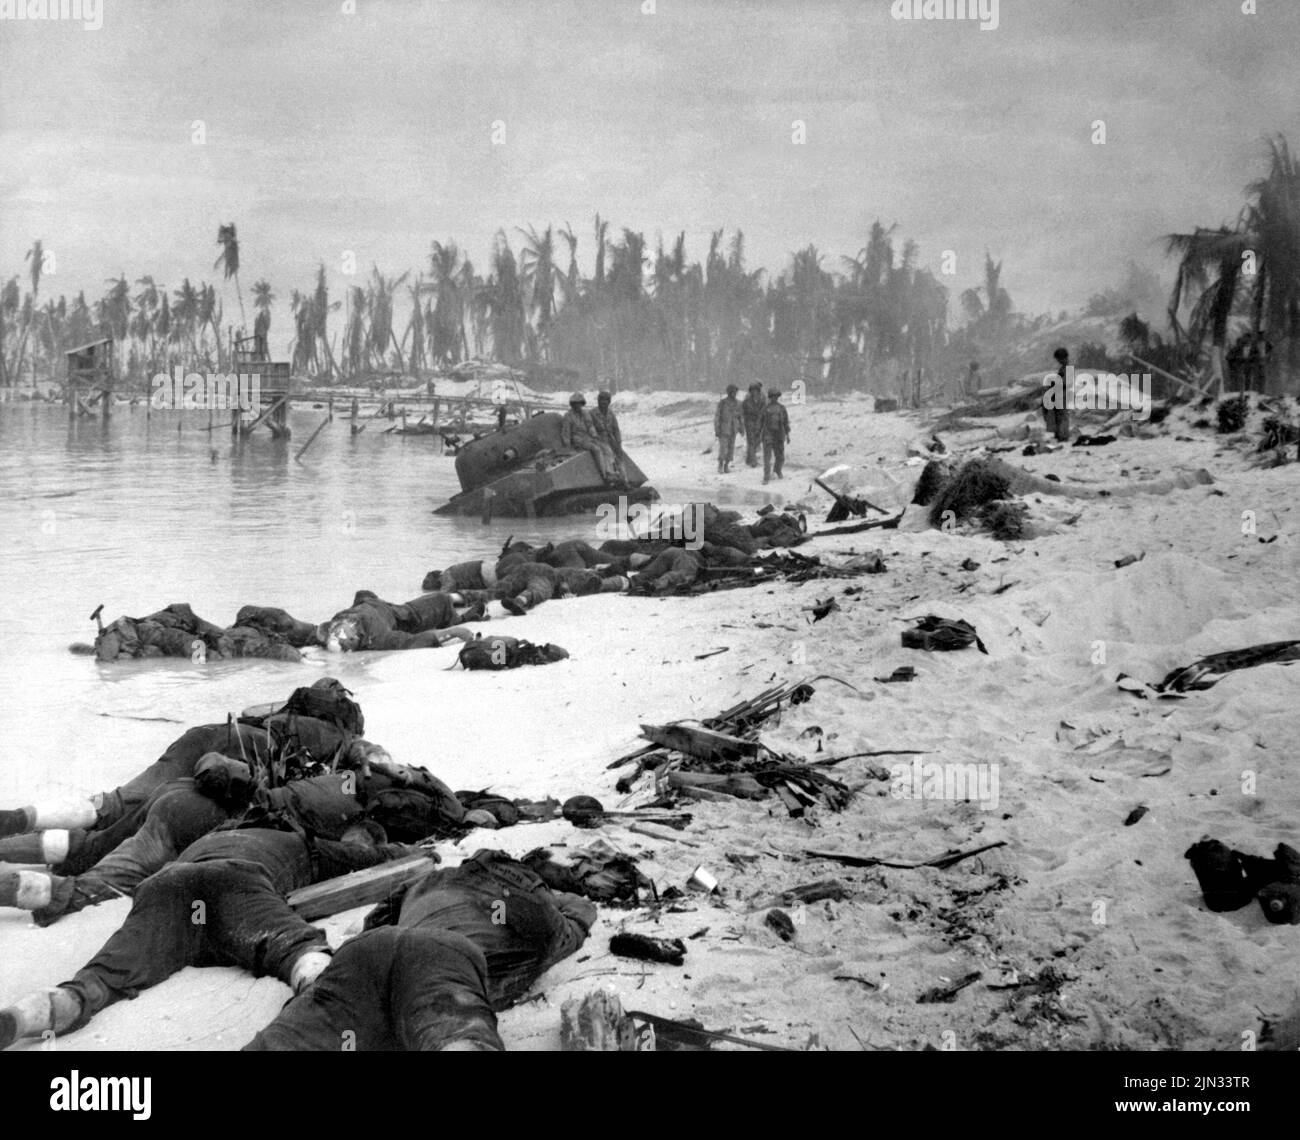 Dead US Marines lying on the beach during the landings on Betio Island in the Battle of Tarawa. The landings on Tarawa were part of the US offensive against the Pacific Islands held by Japan before preparing for an assault on the Japanese mainland. Stock Photo